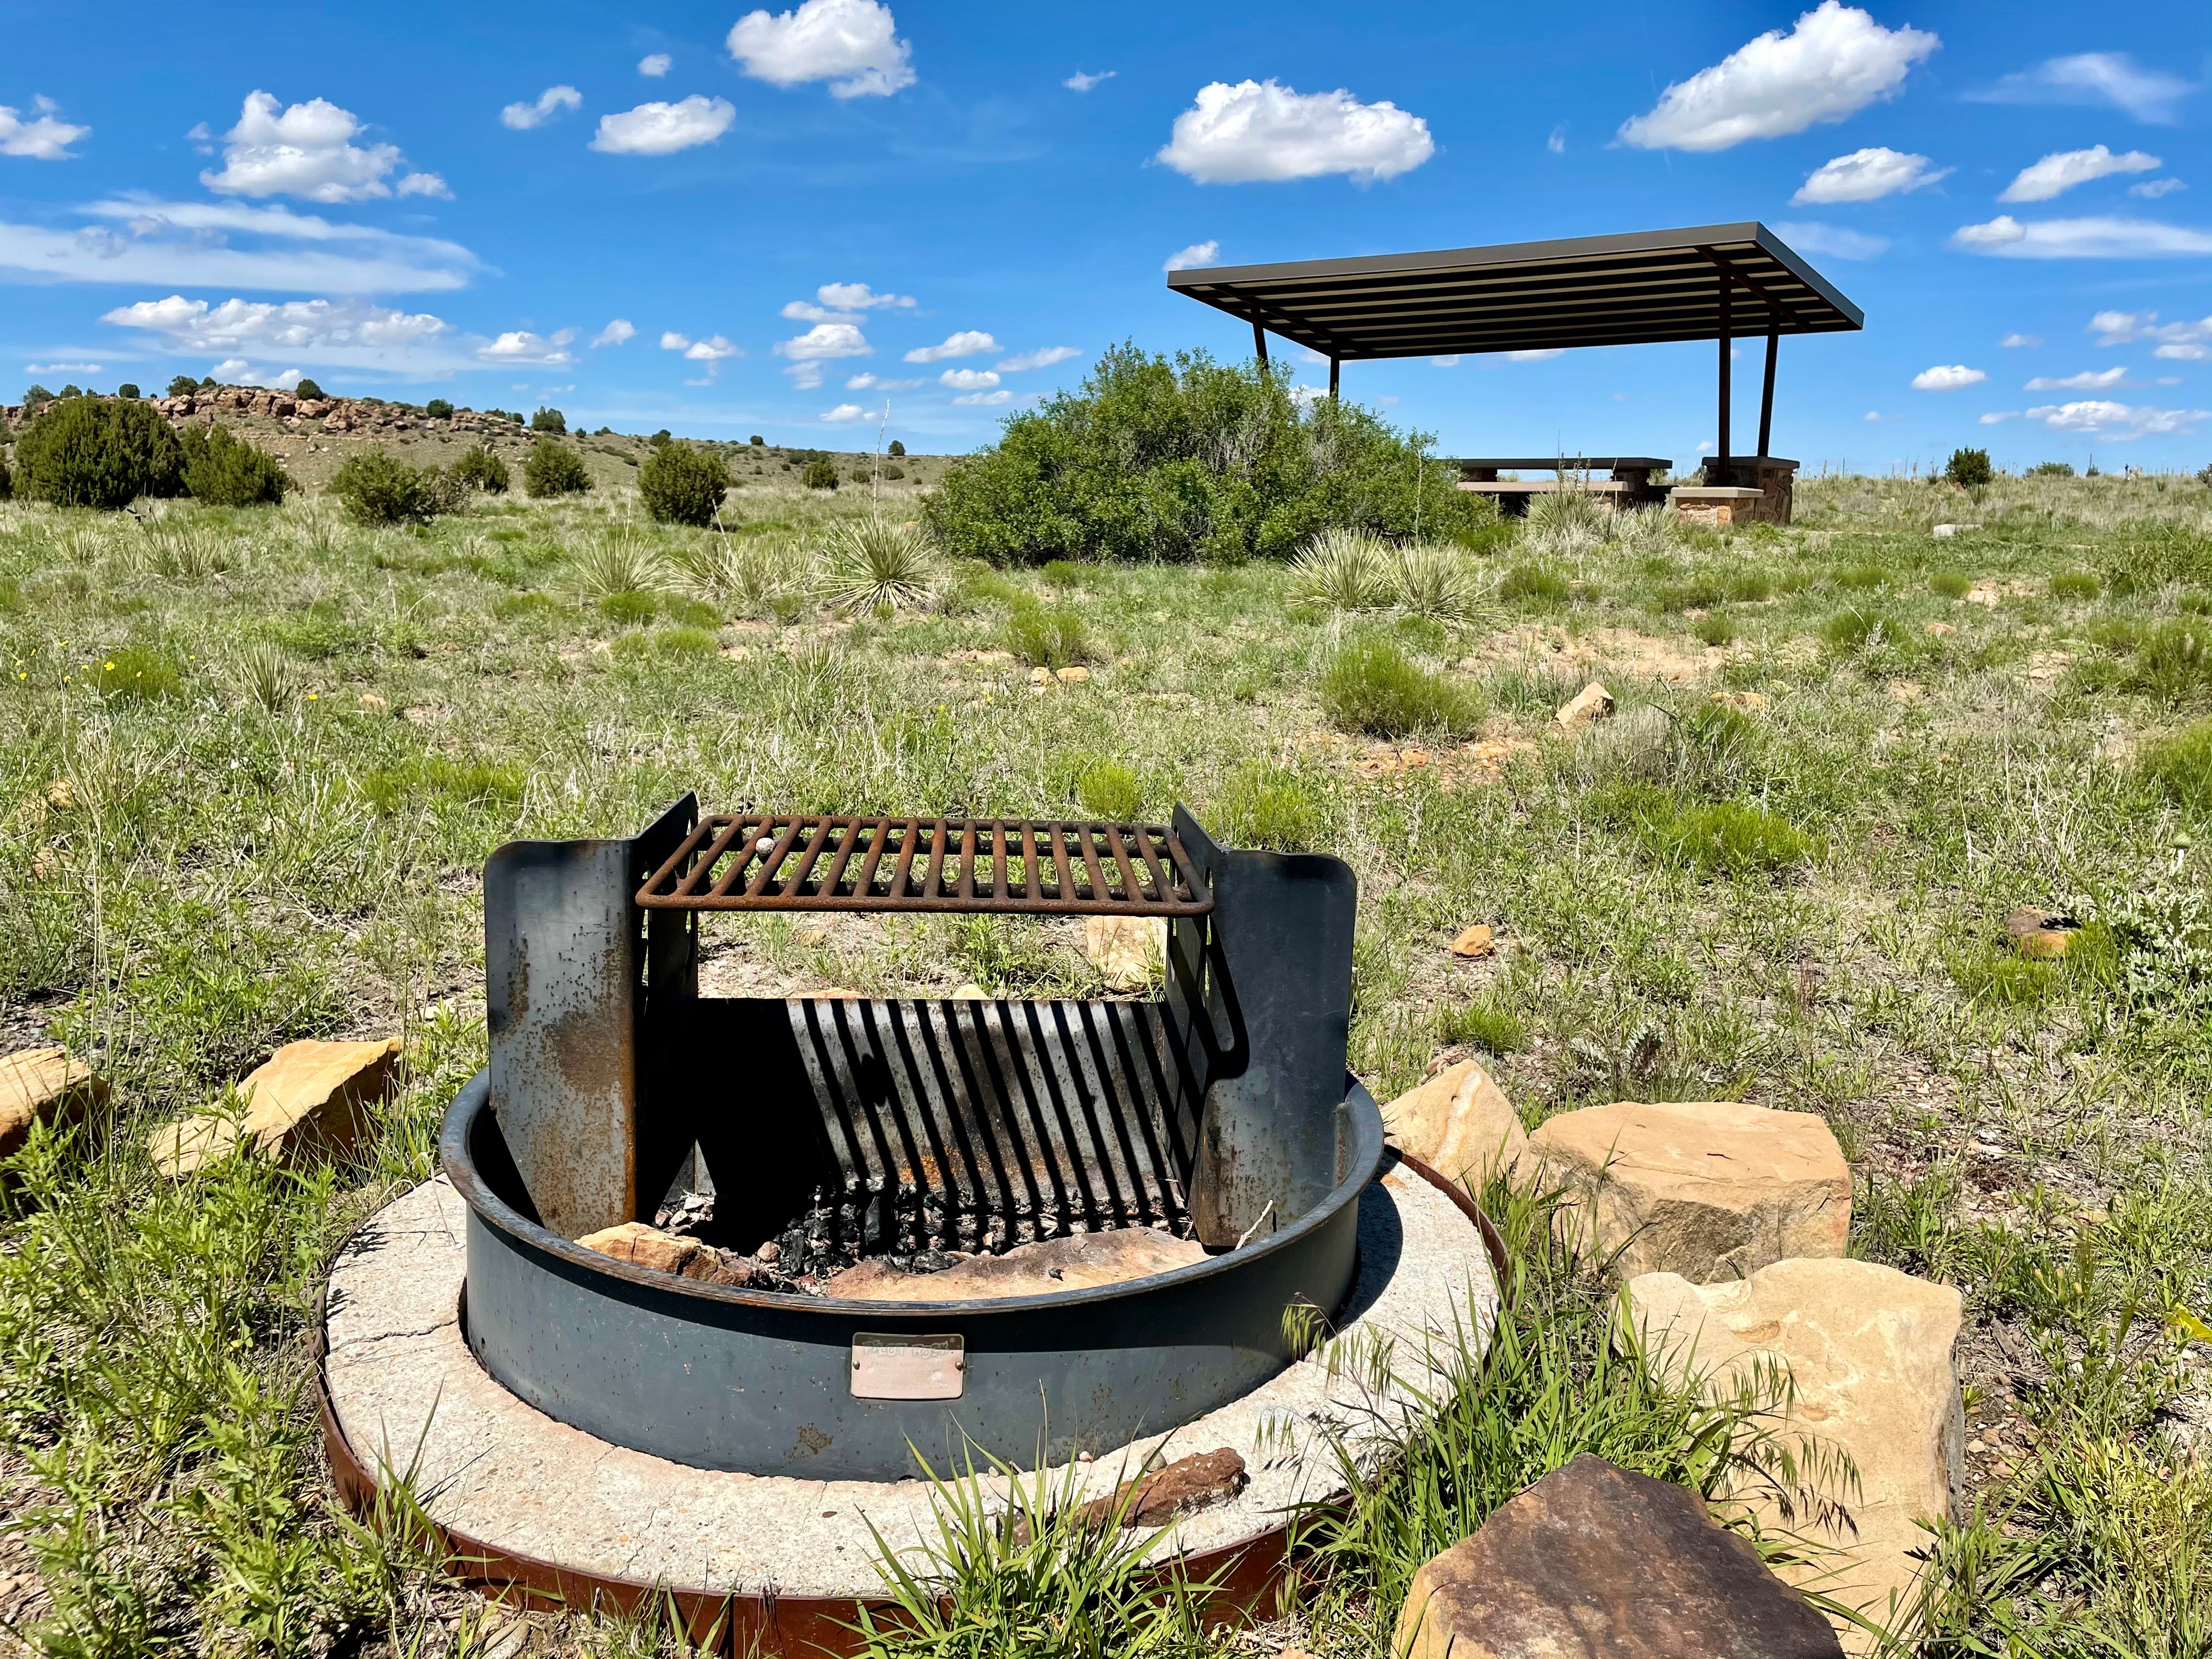 Camper submitted image from Carizzo Canyon Picnic Area, Comanche National Grassland - 3